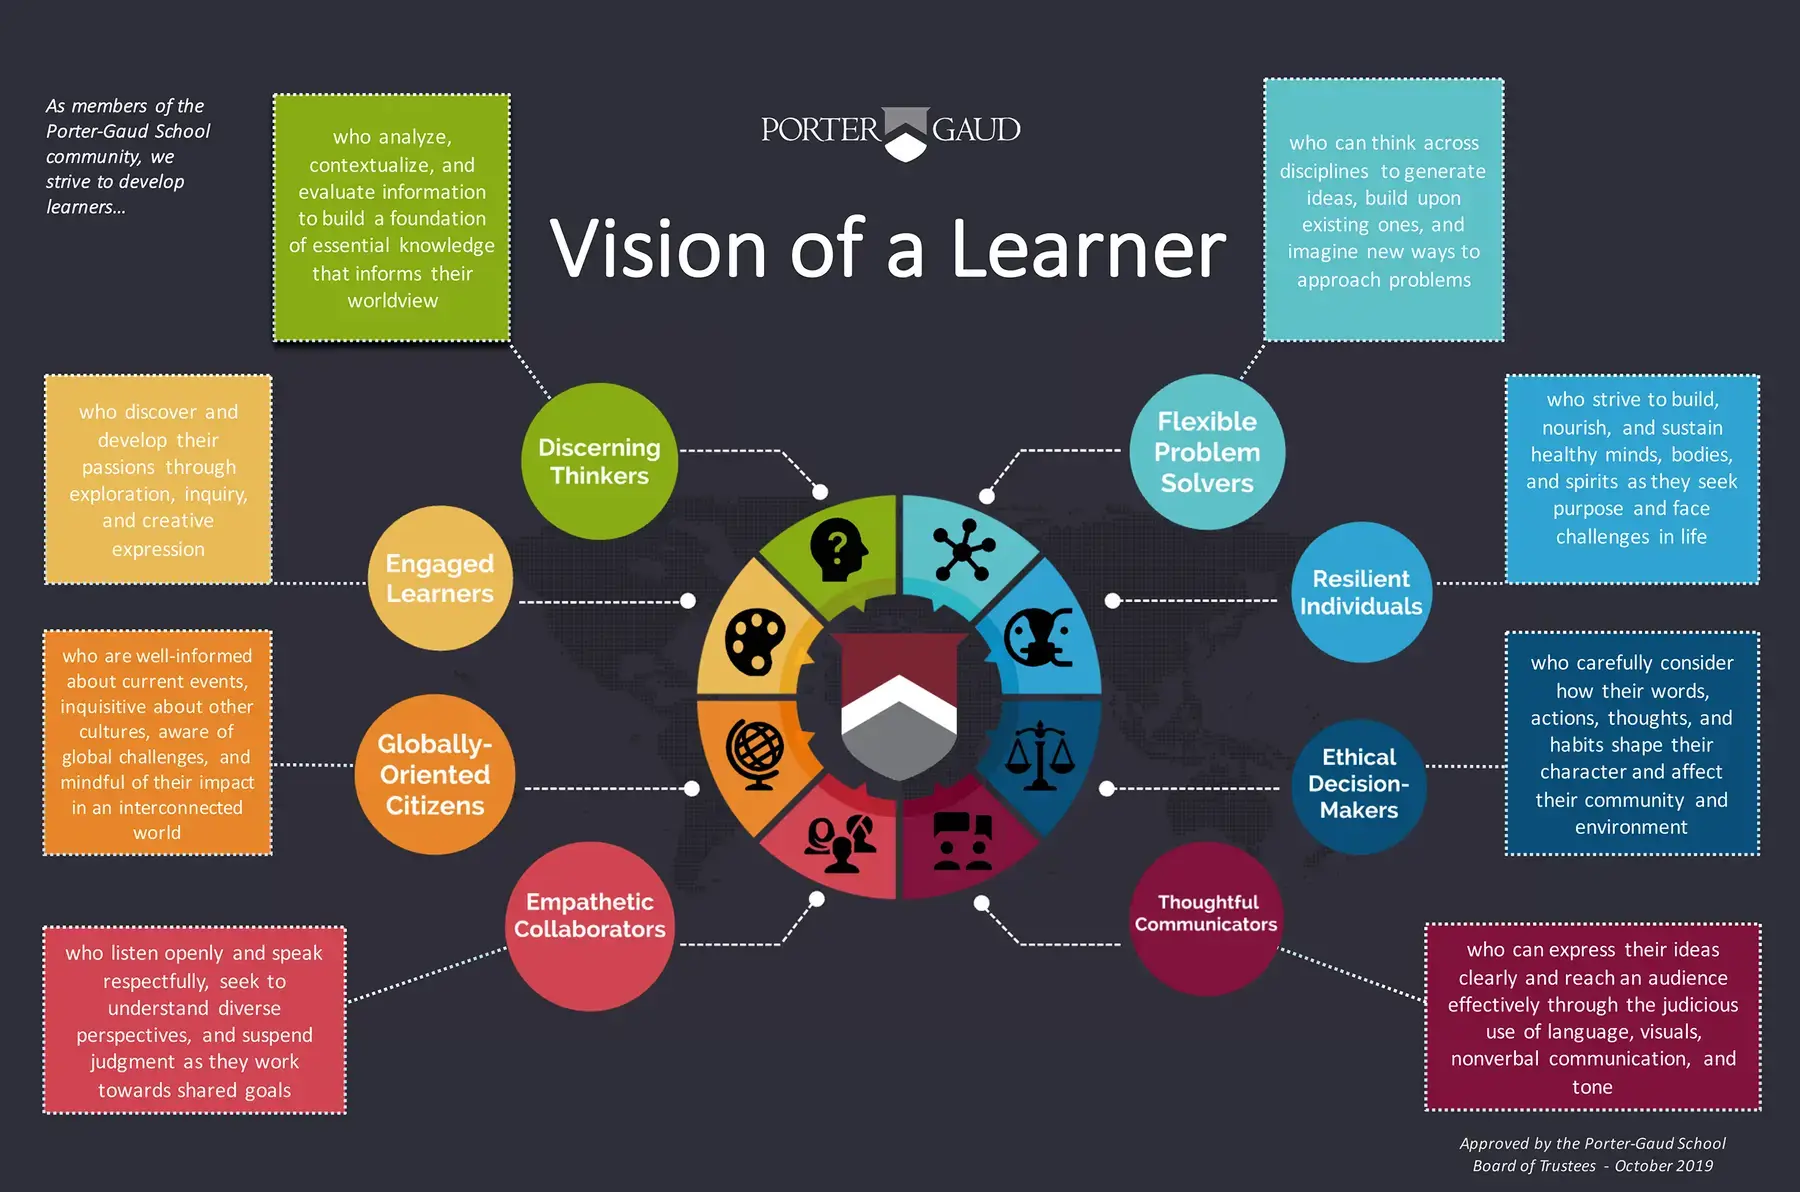 Our Vision of a Learner, Porter-Gaud Schools